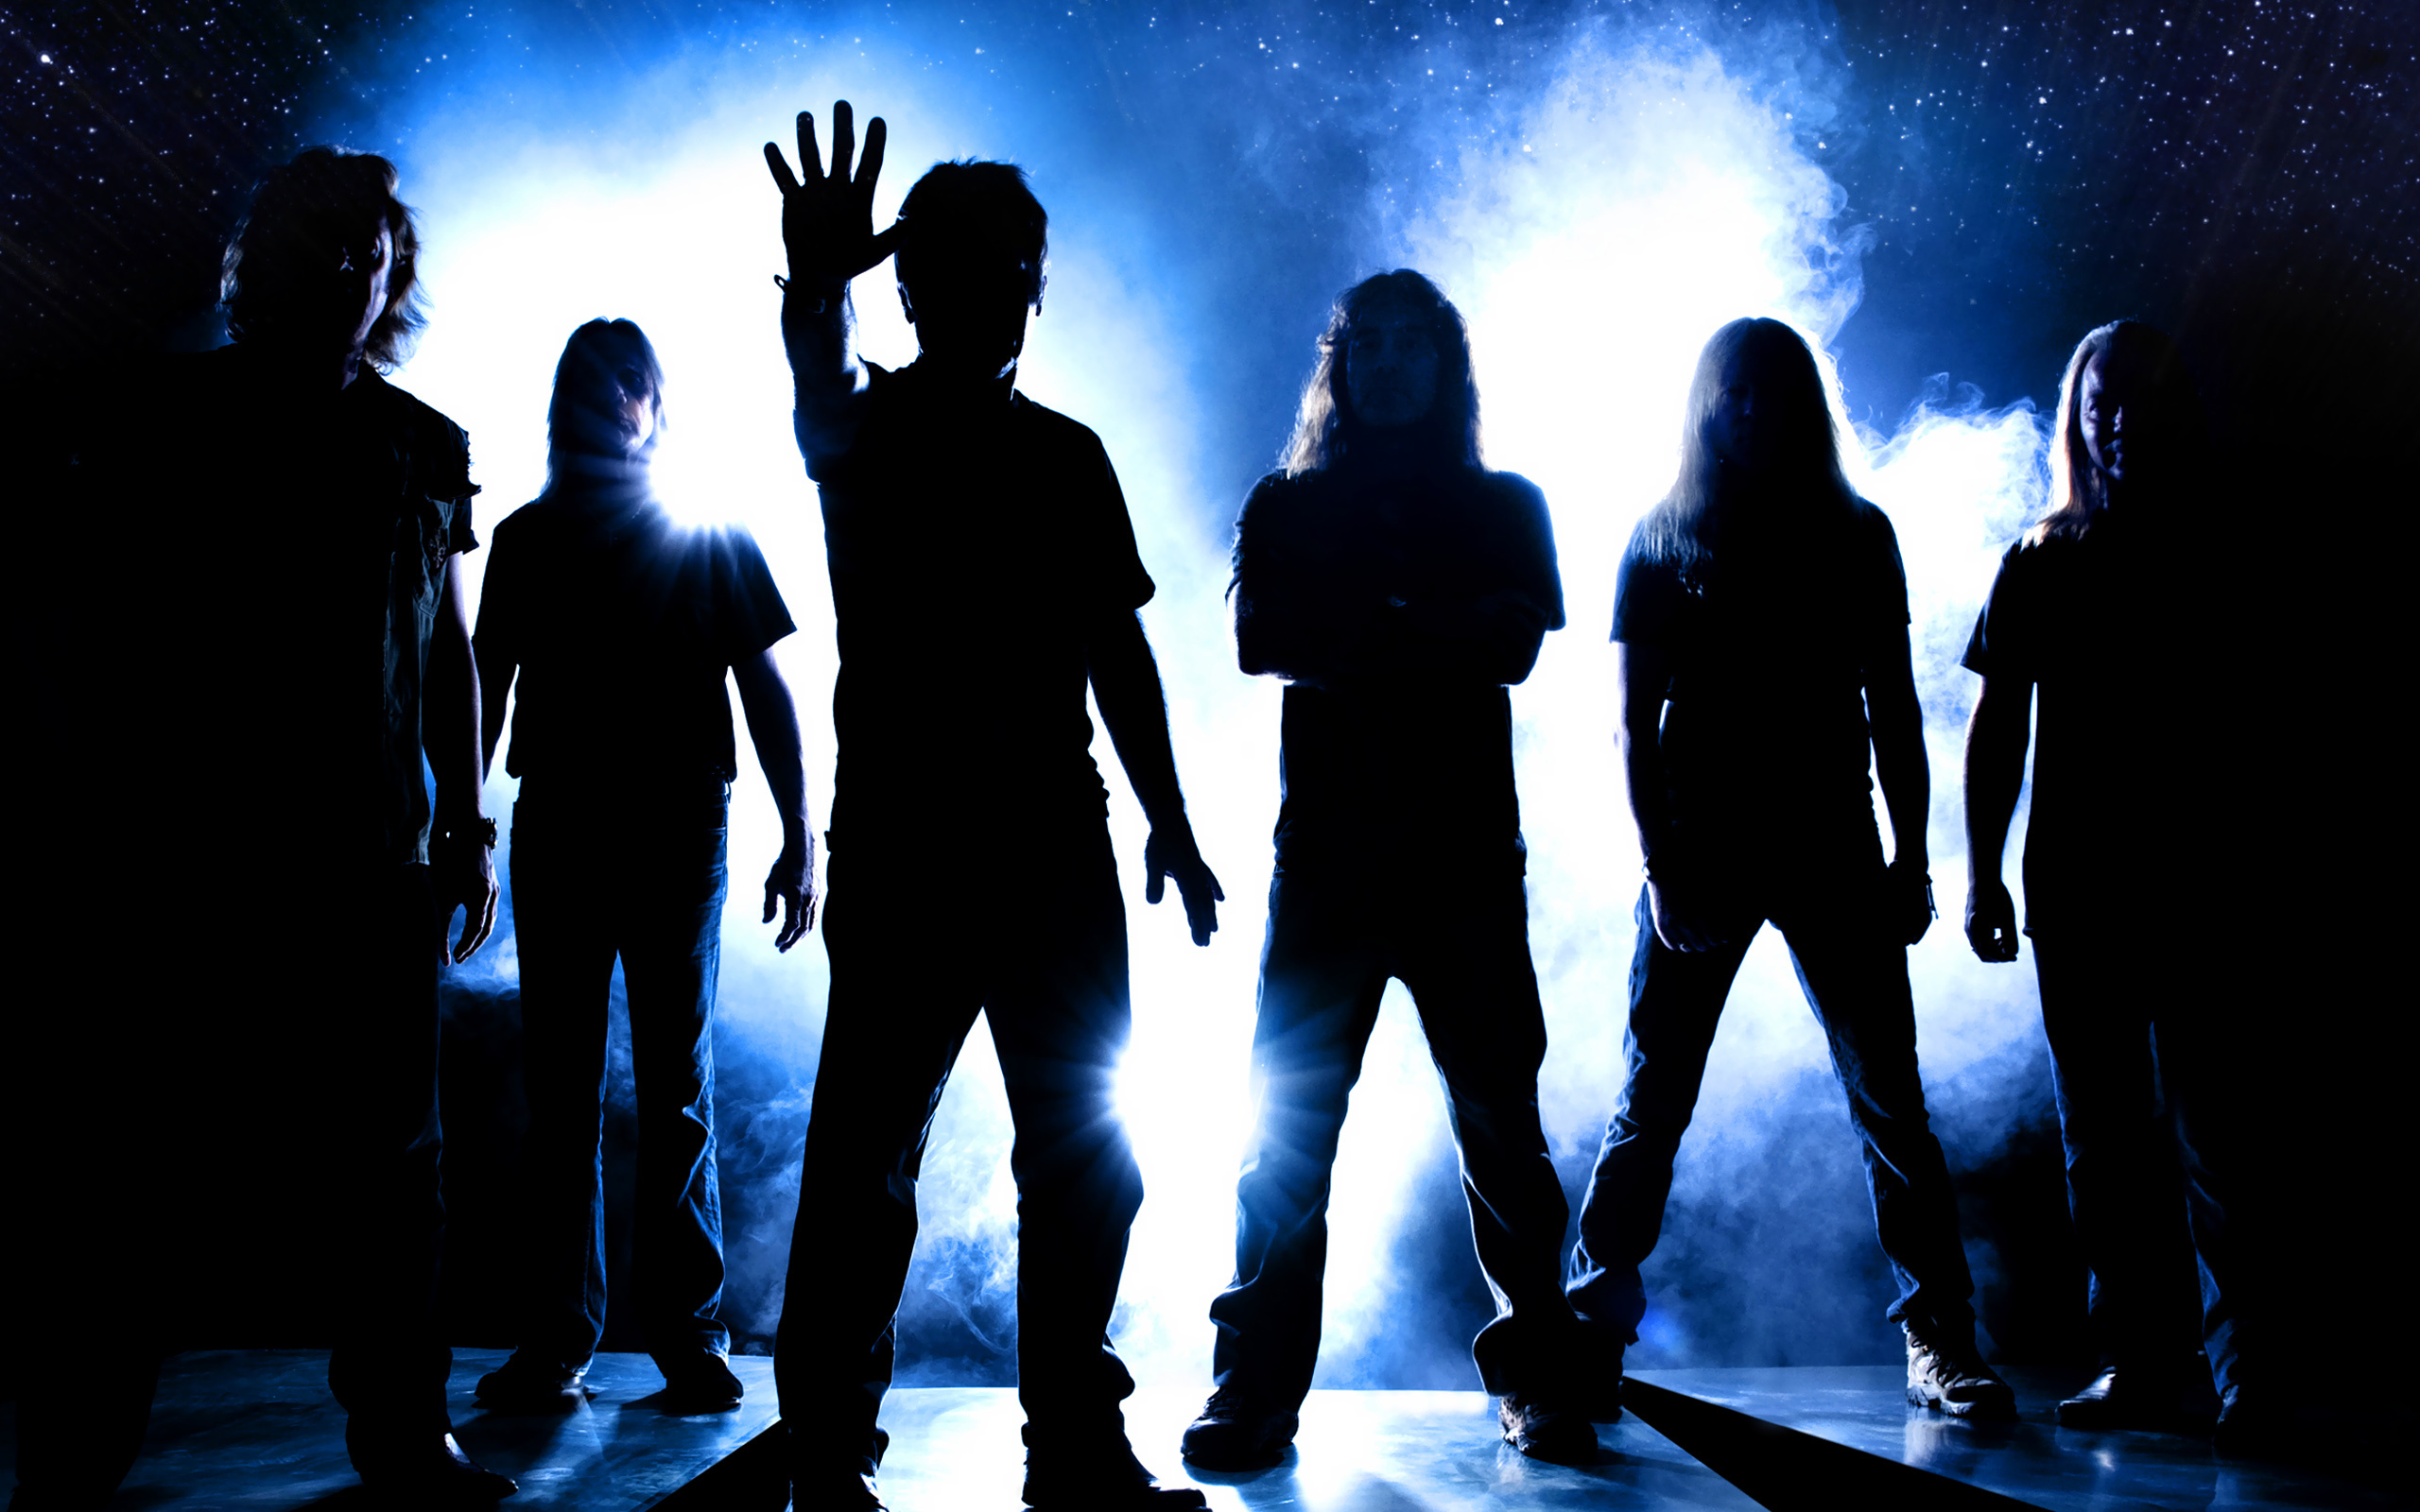 Iron Maiden Band Music, Free download, HD wallpapers, Rock and metal bands, 2560x1600 HD Desktop